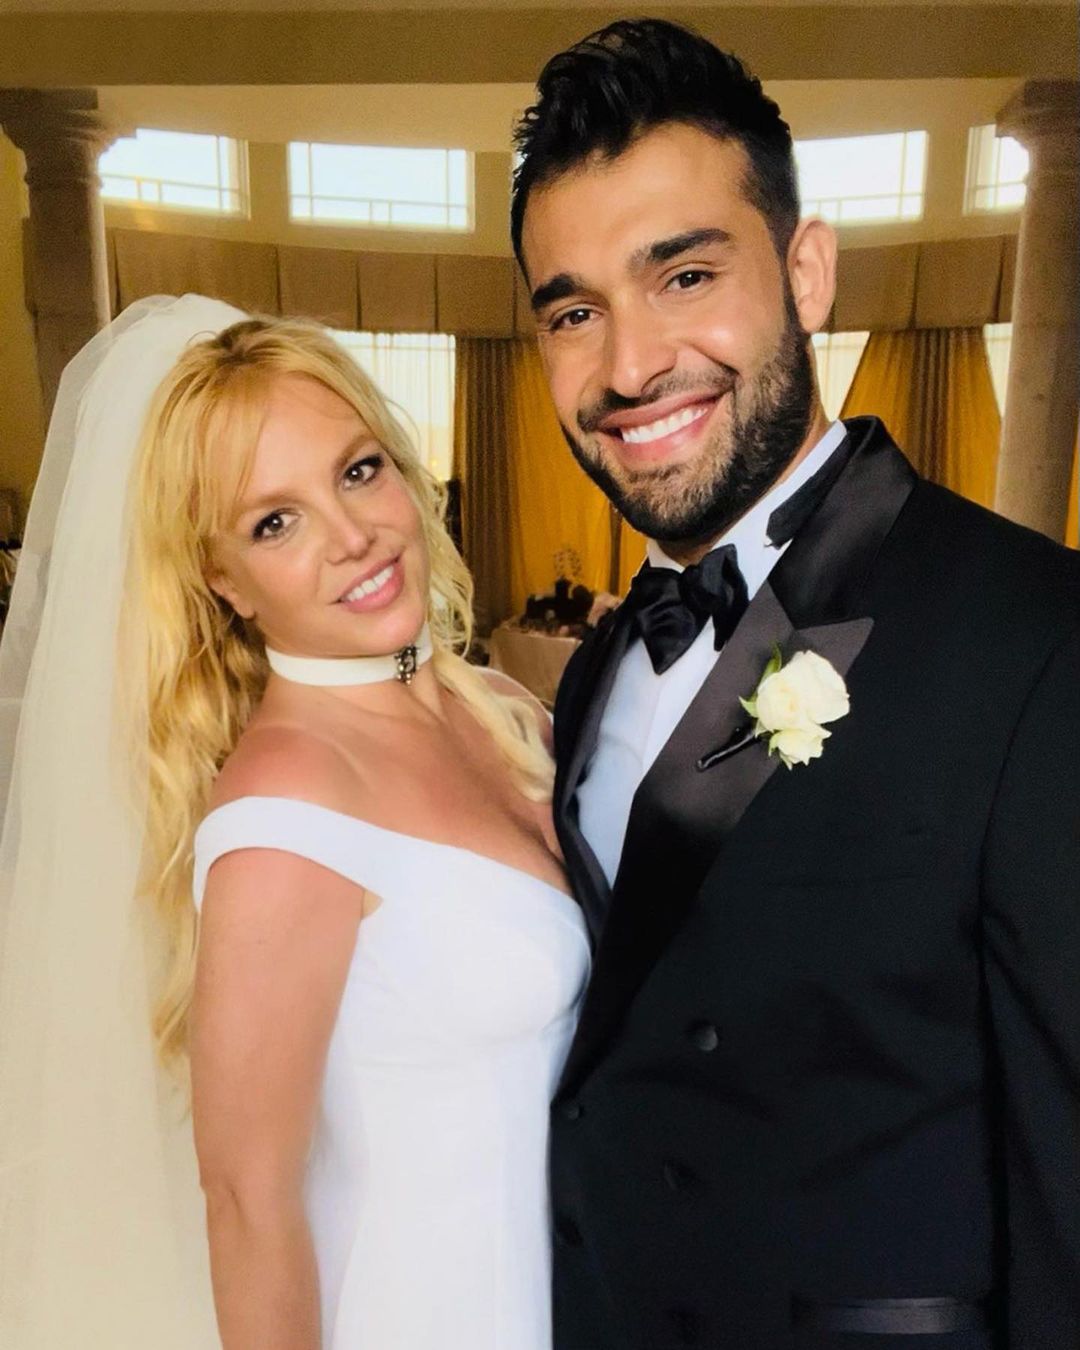 Britney Spears' Ex-Husband Facing Three Years In Prison For Wedding Crash